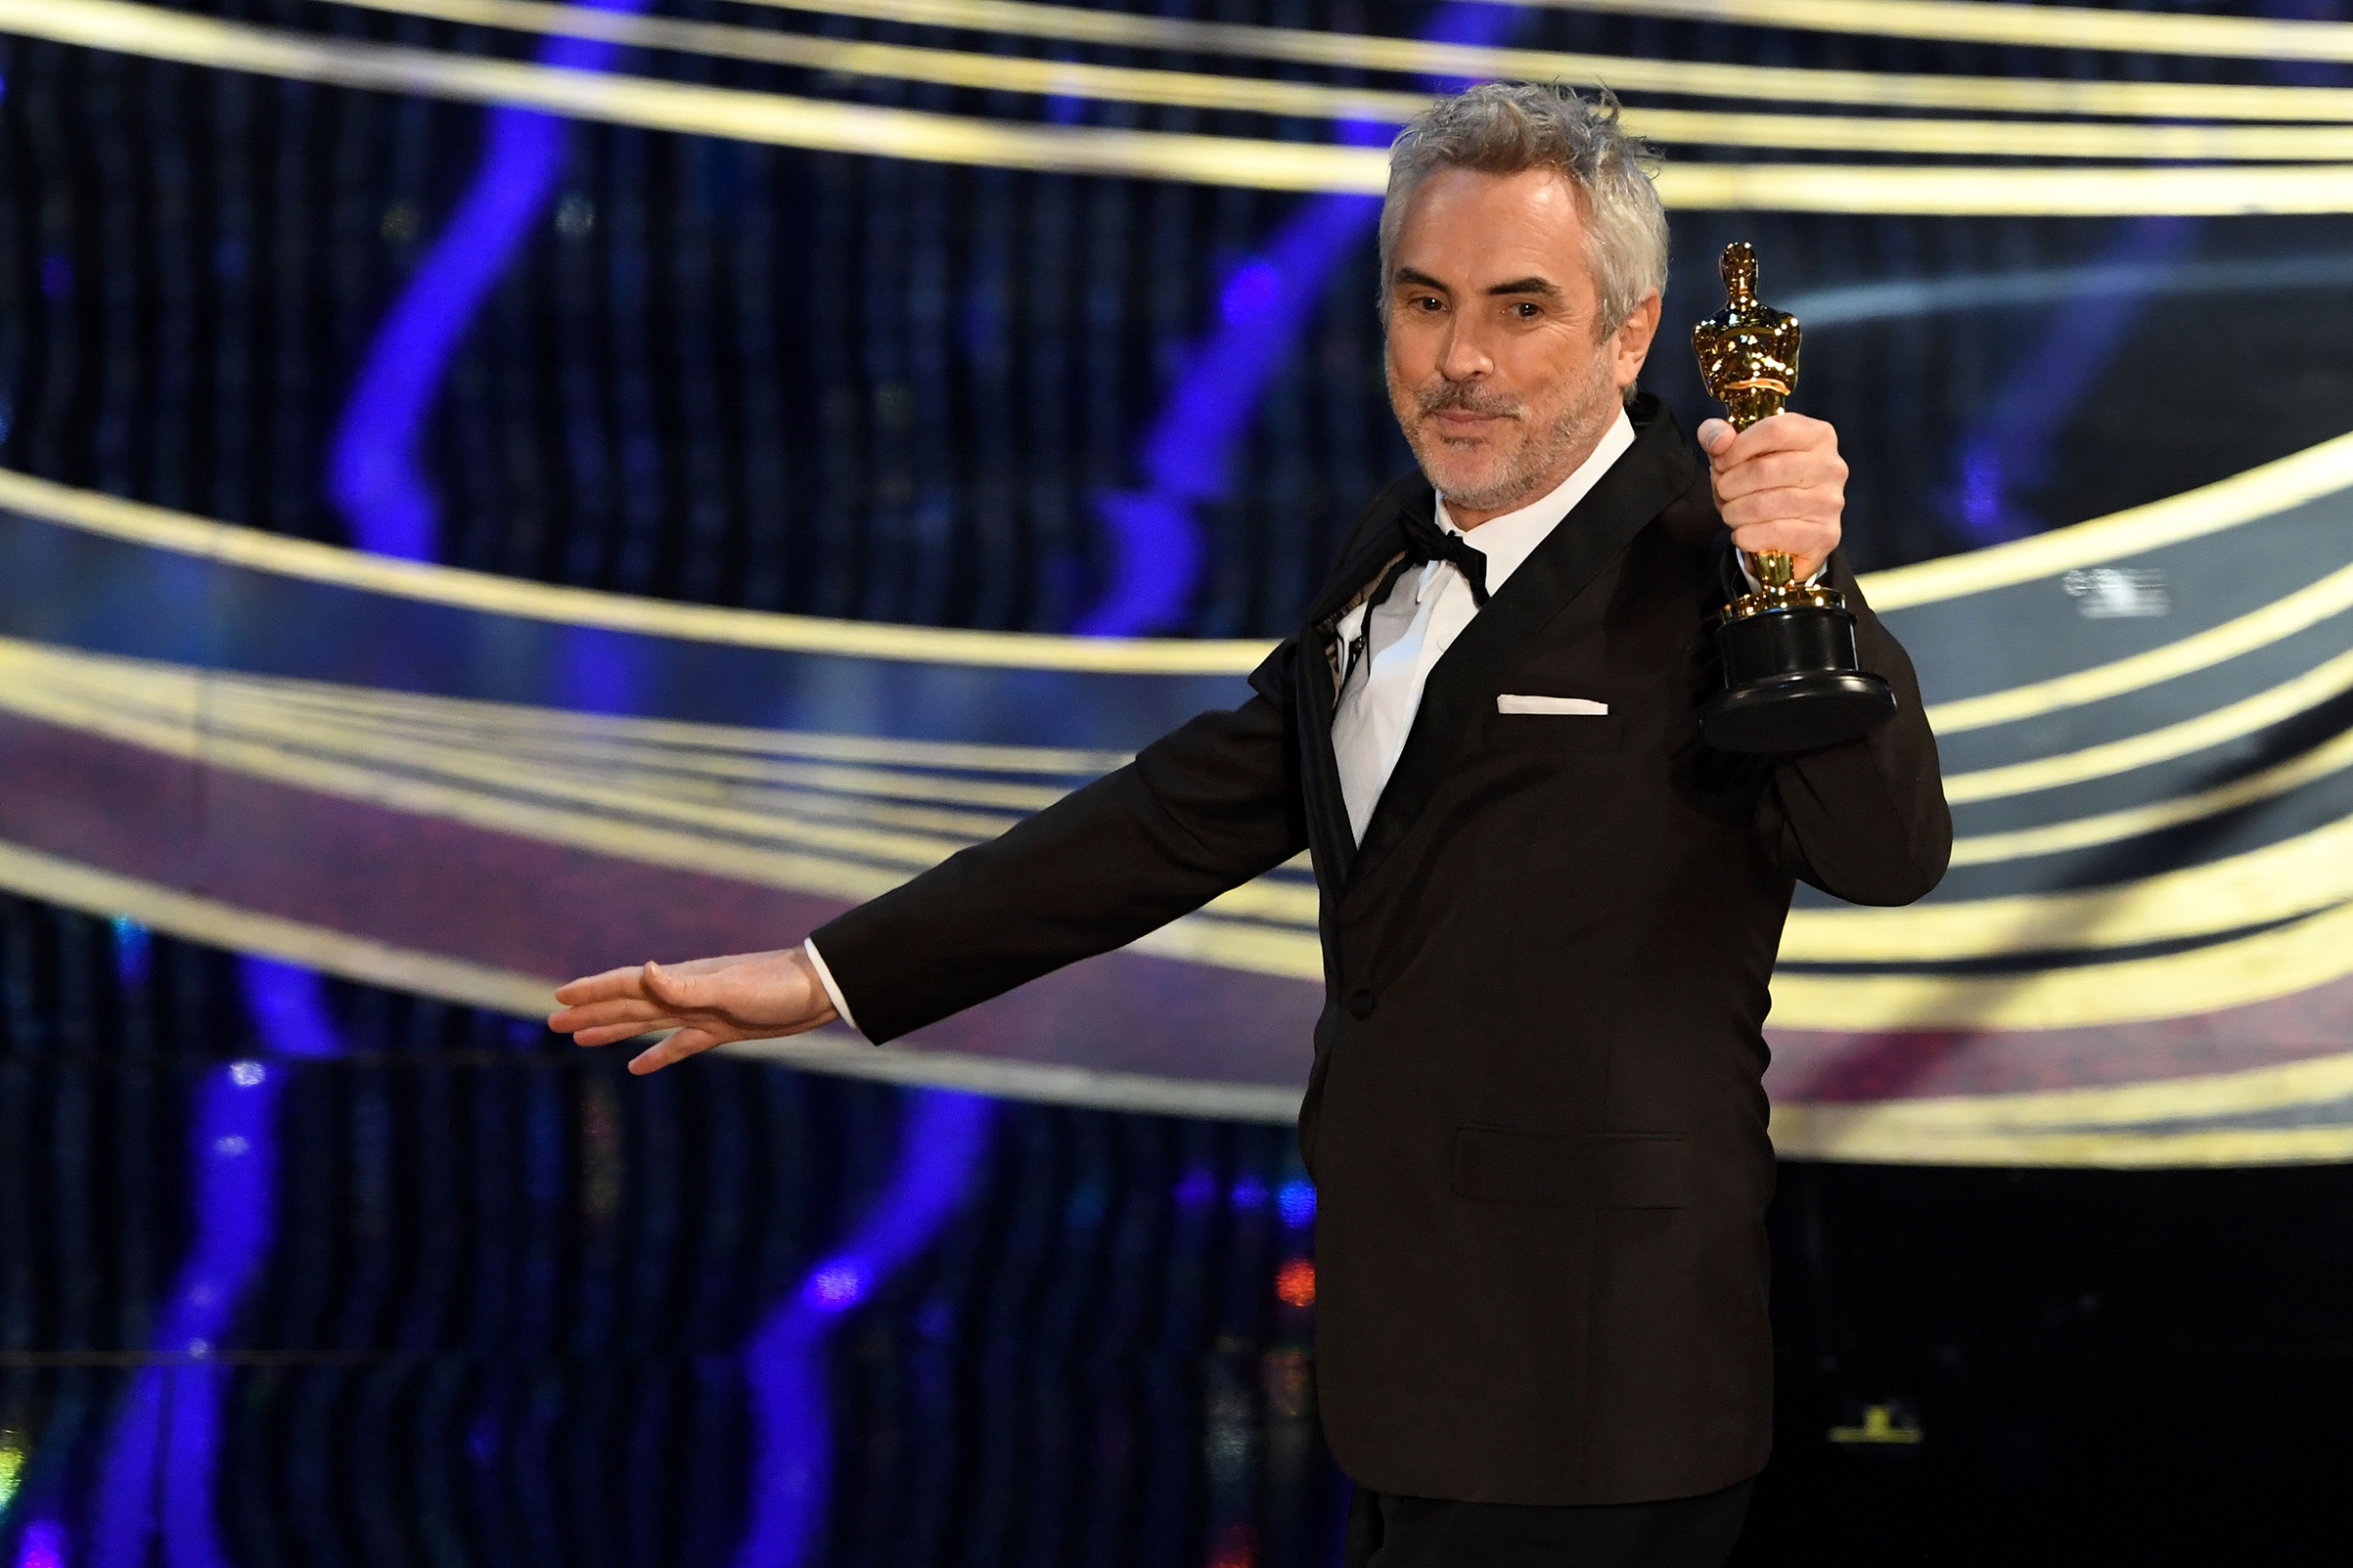 Best Cinematography nominee for "Roma" Alfonso Cuaron accepts the award for Best Cinematography during the 91st Annual Academy Awards at the Dolby Theatre in Hollywood on Feb. 24, 2019. (Valerie Macon—AFP/Getty Images)